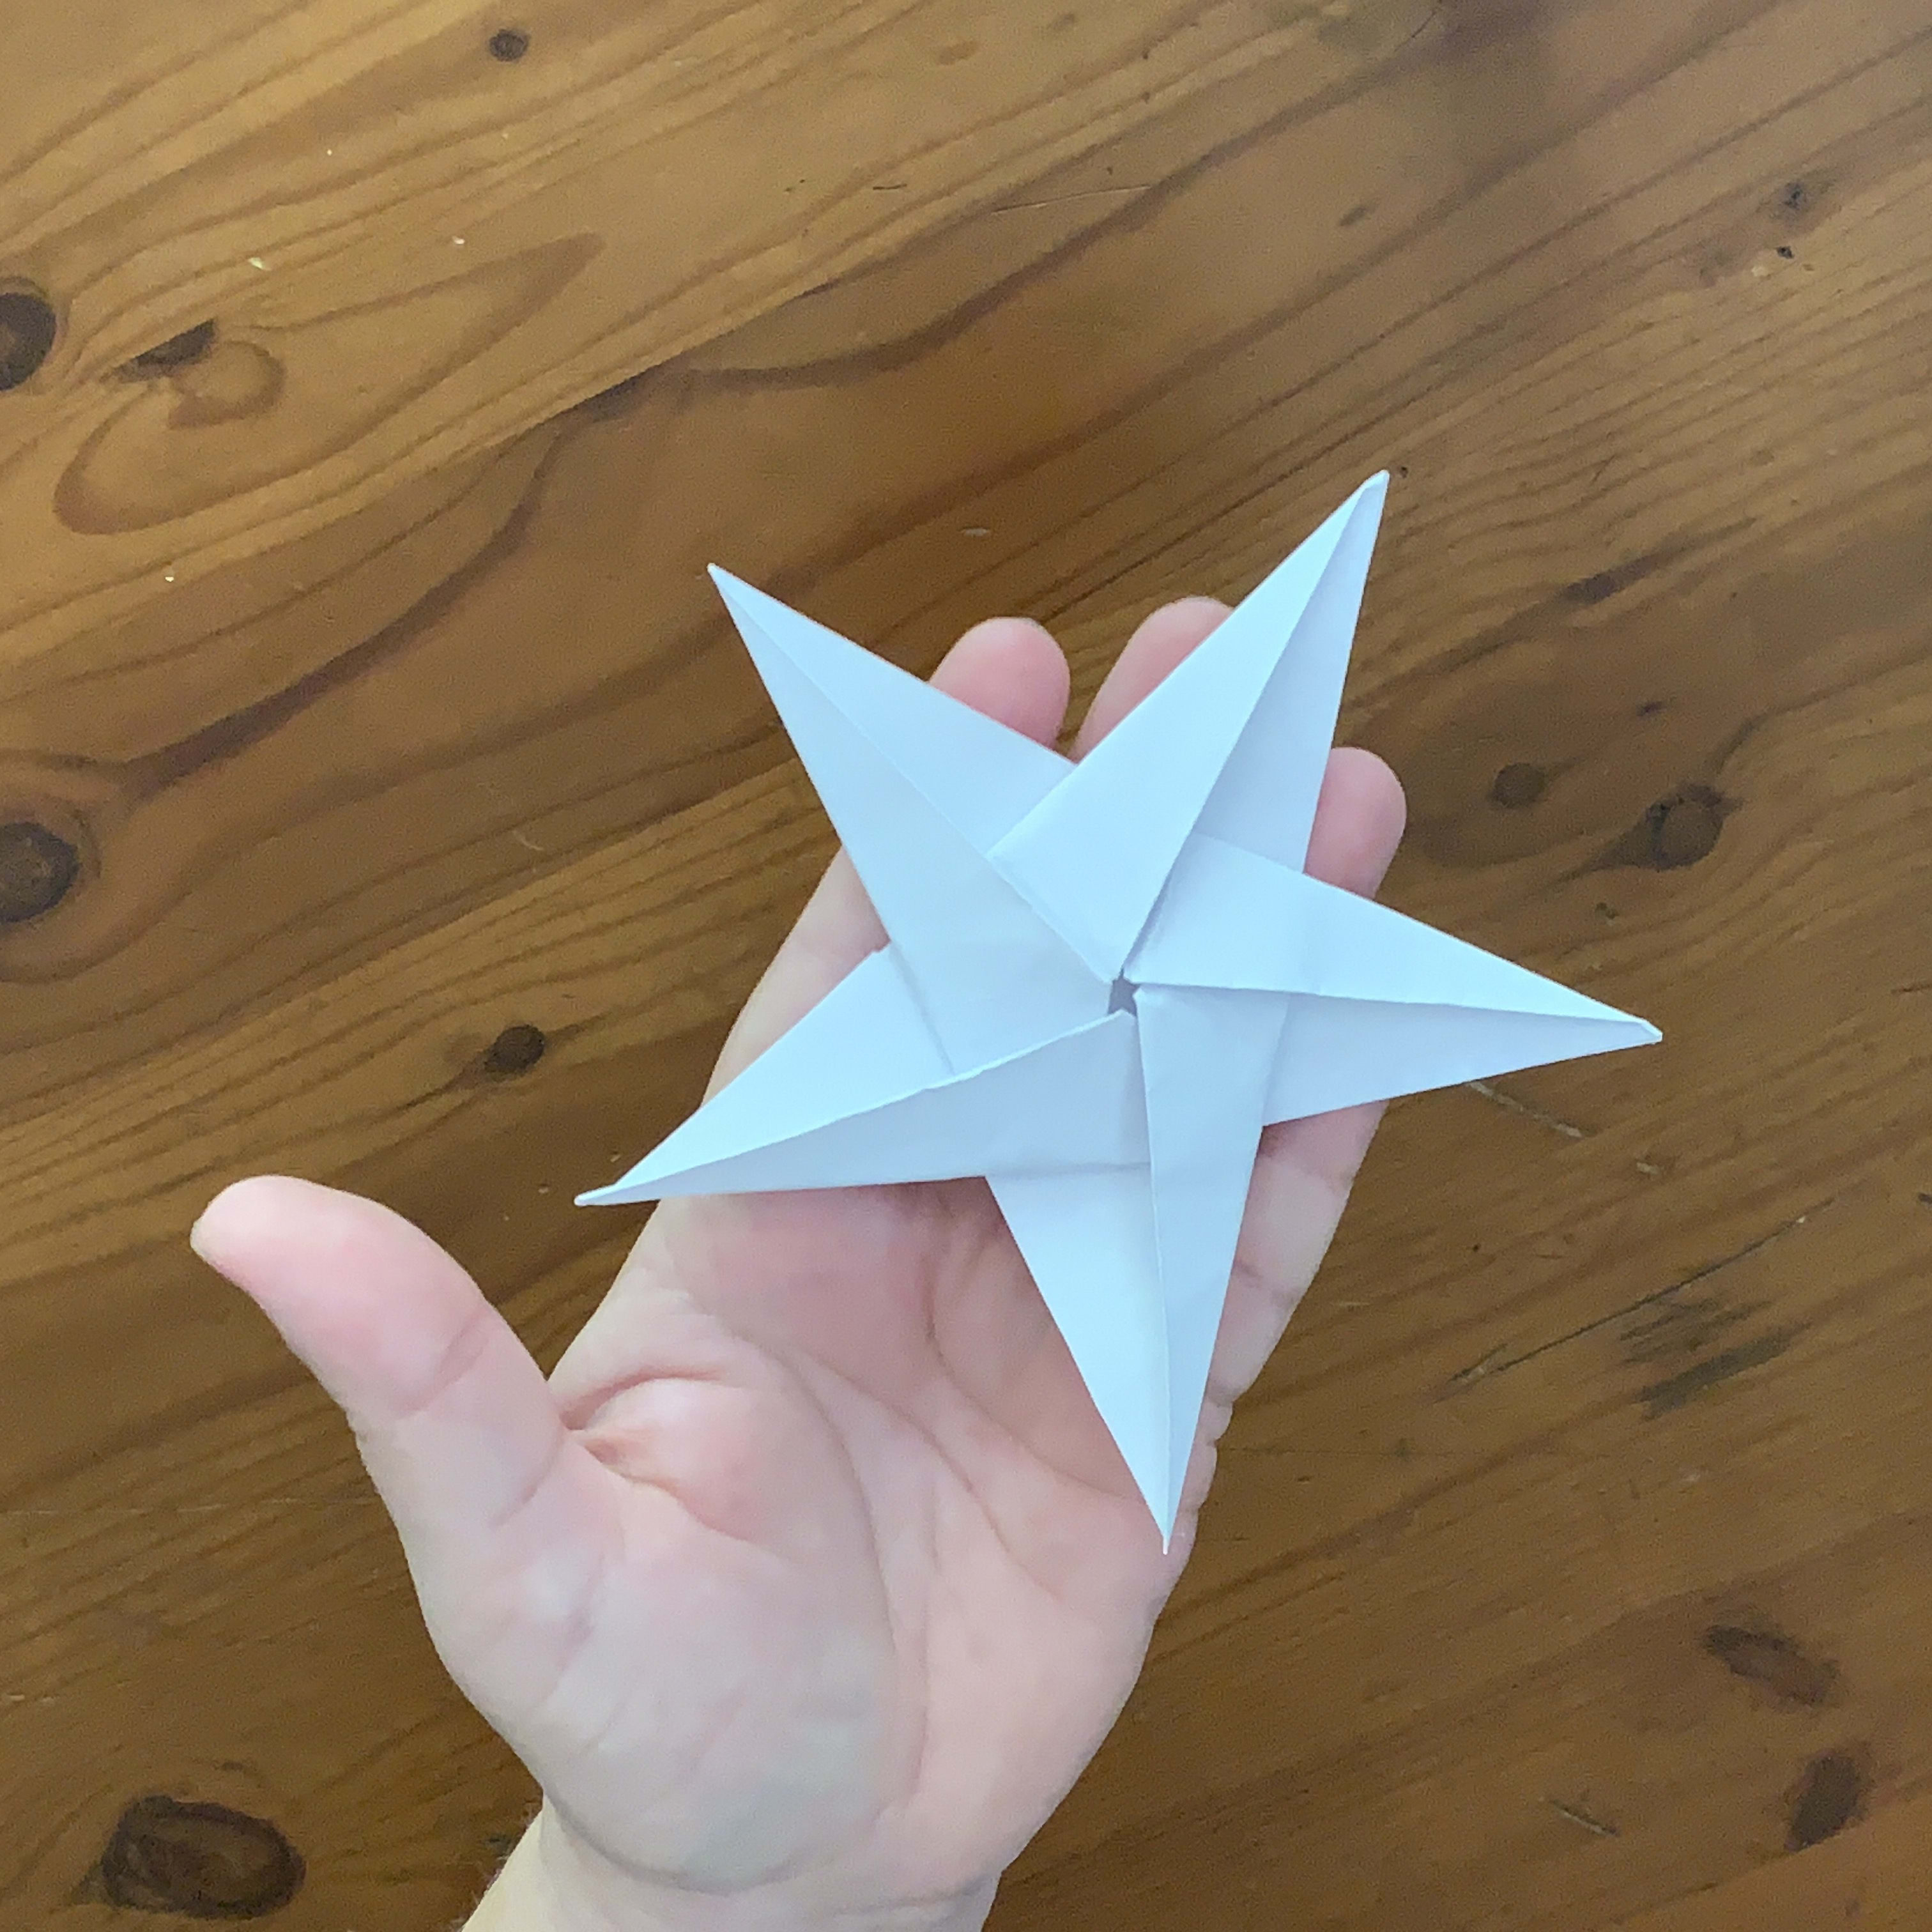 Origami Paper Star Tutorial, Learn how to fold a paper star in this cute origami  paper star tutorial. Follow the step by step paper folding instructions for  this easy origami paper